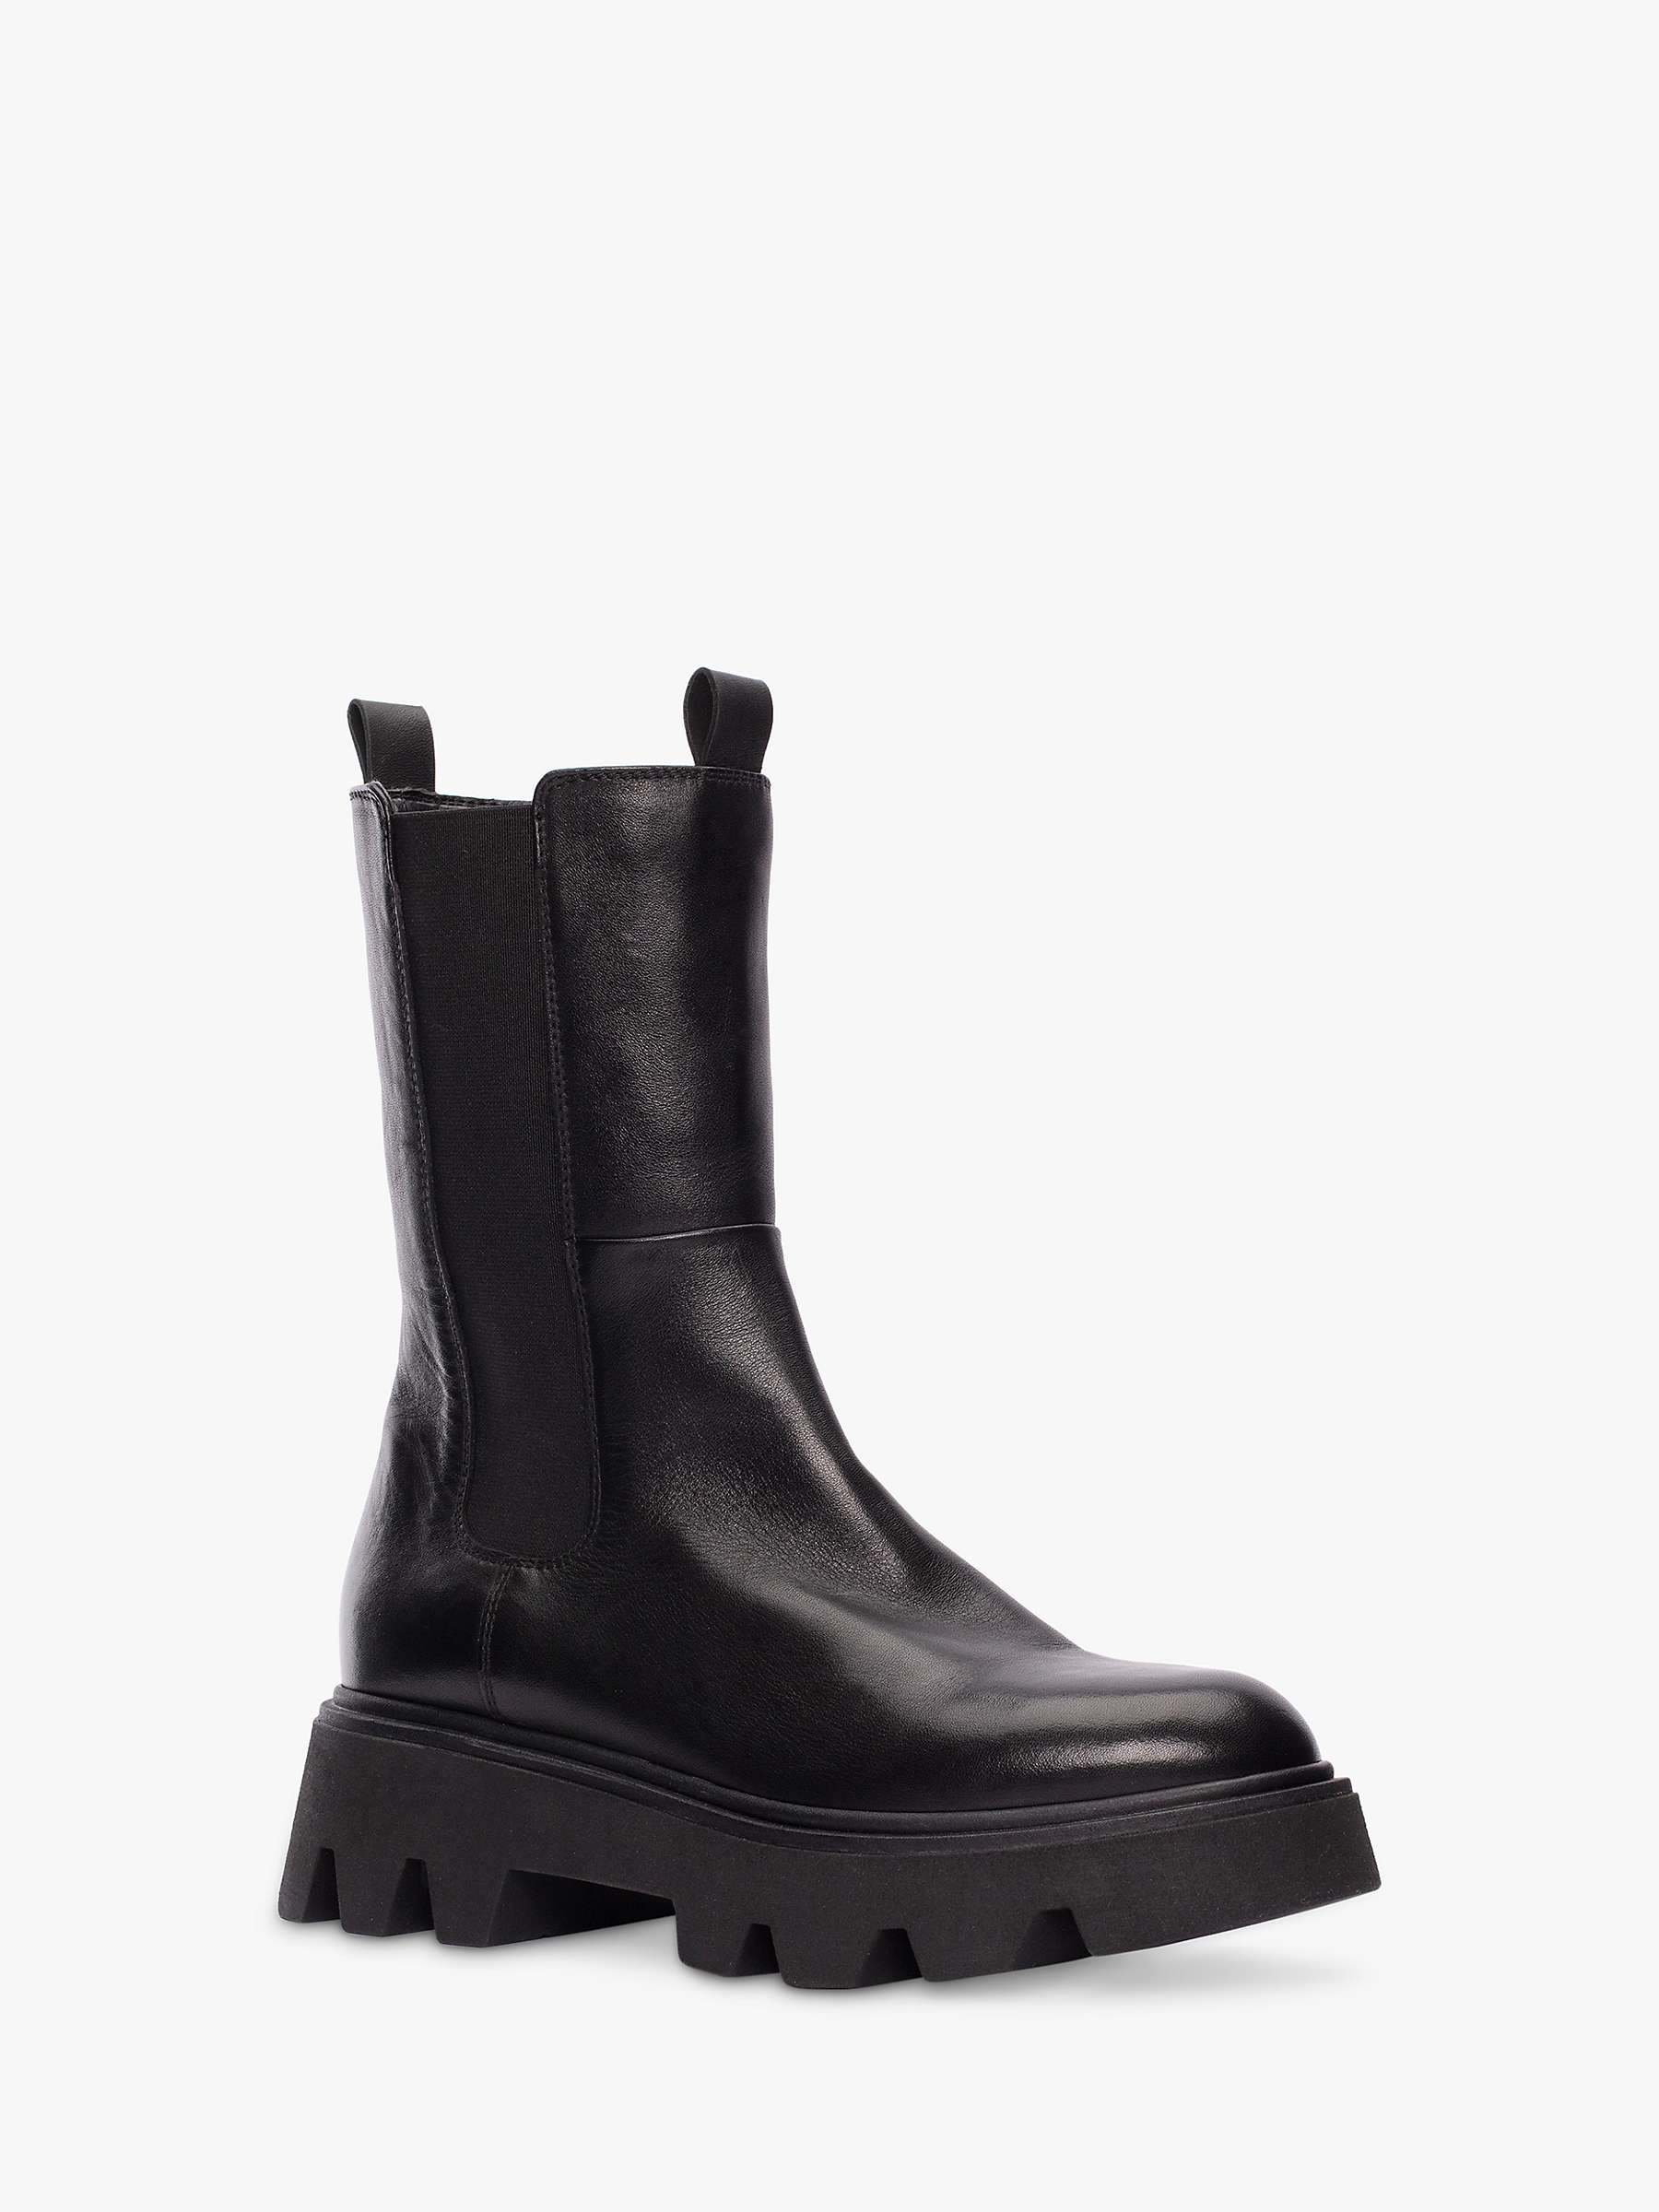 Clarks Motive 2.0 Leather Ankle Boots, Black at John Lewis & Partners